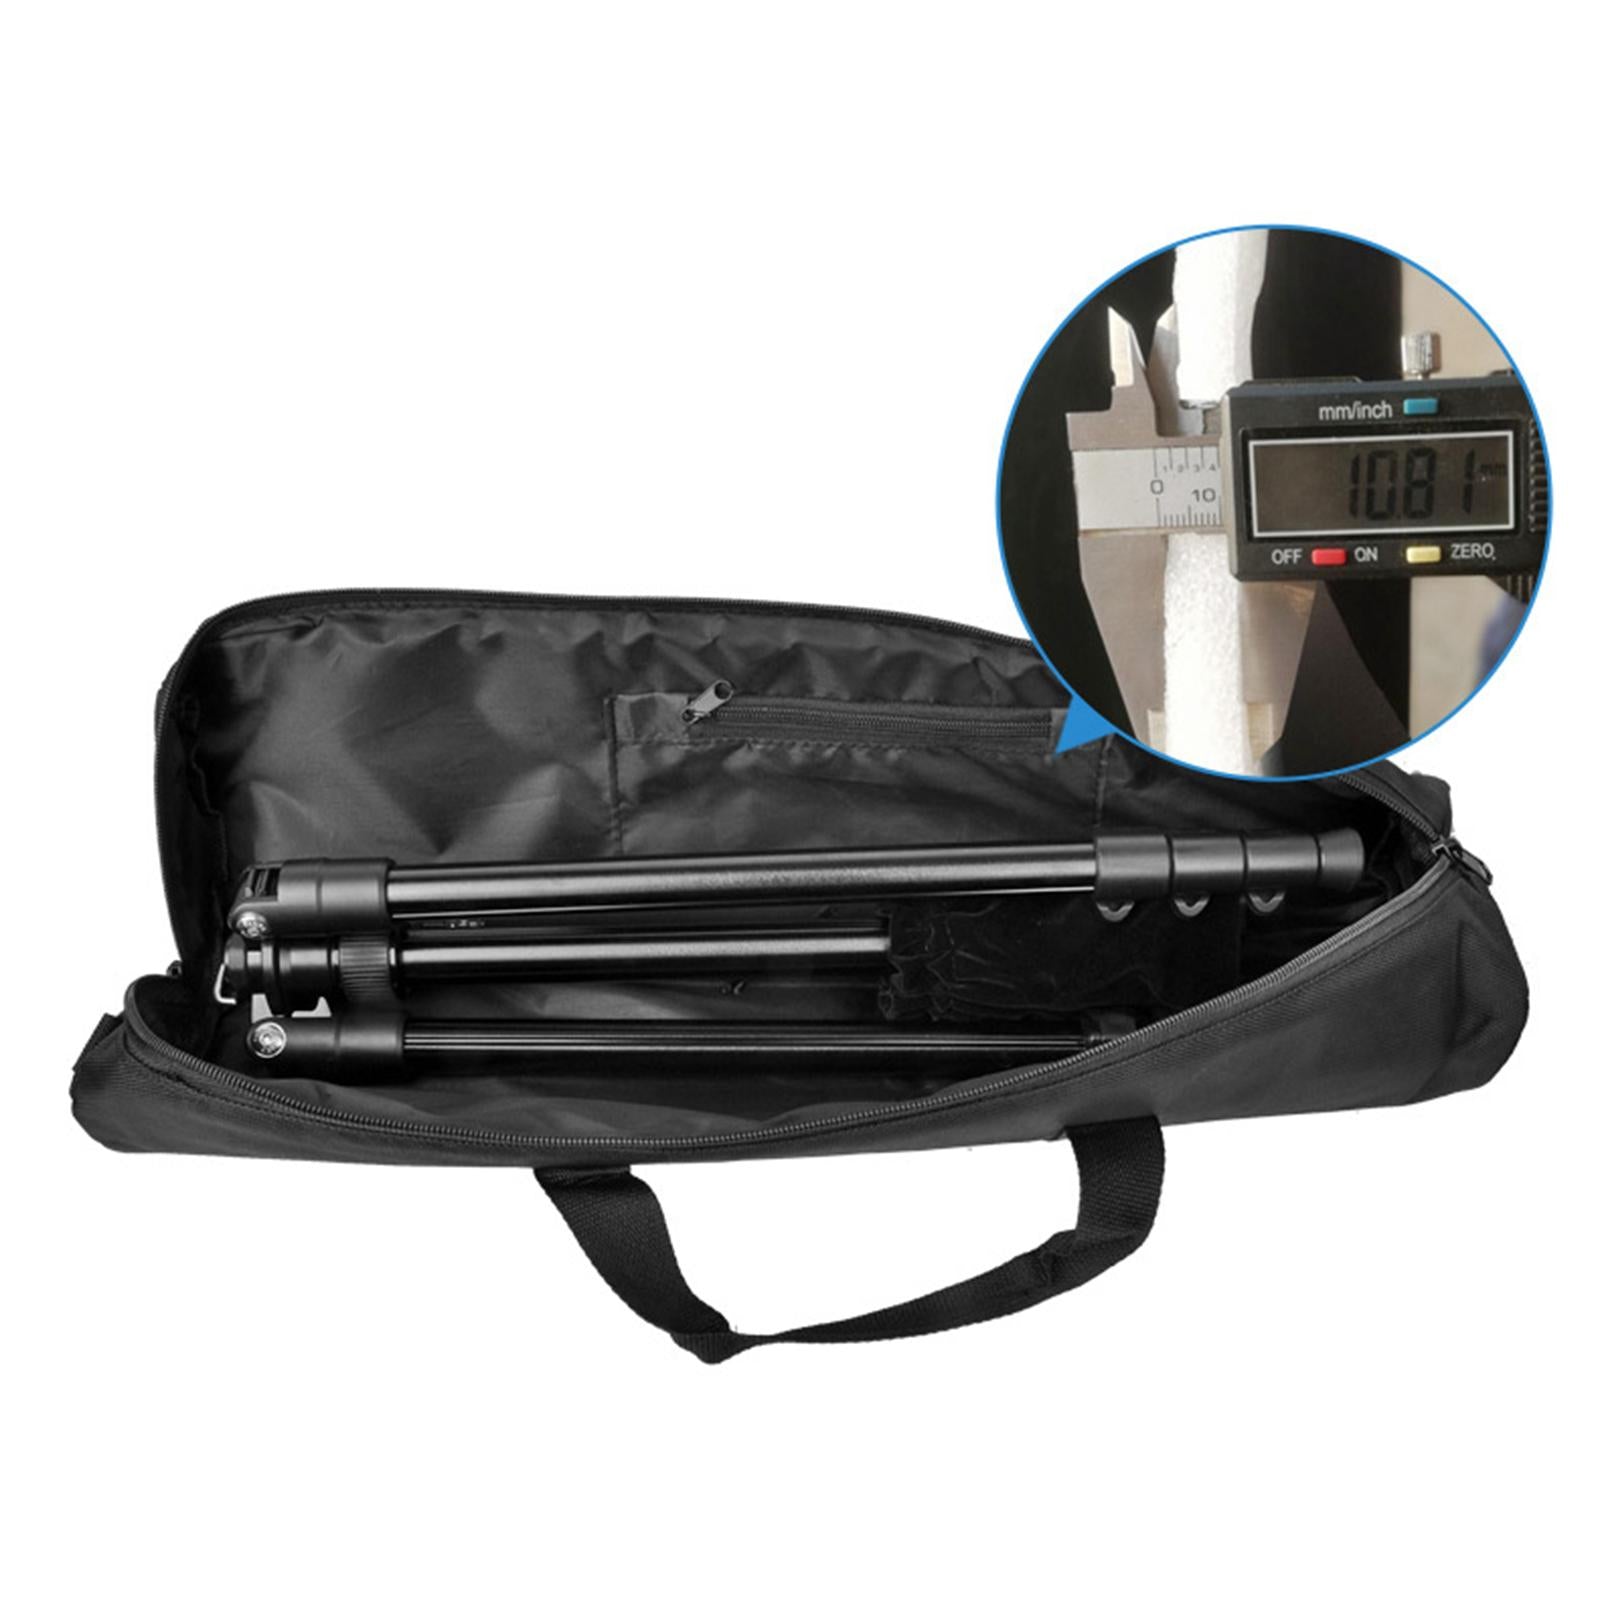 Tripod Carrying Bag Heavy Duty Multi Function Dual Use Outdoor for Umbrella 120cm